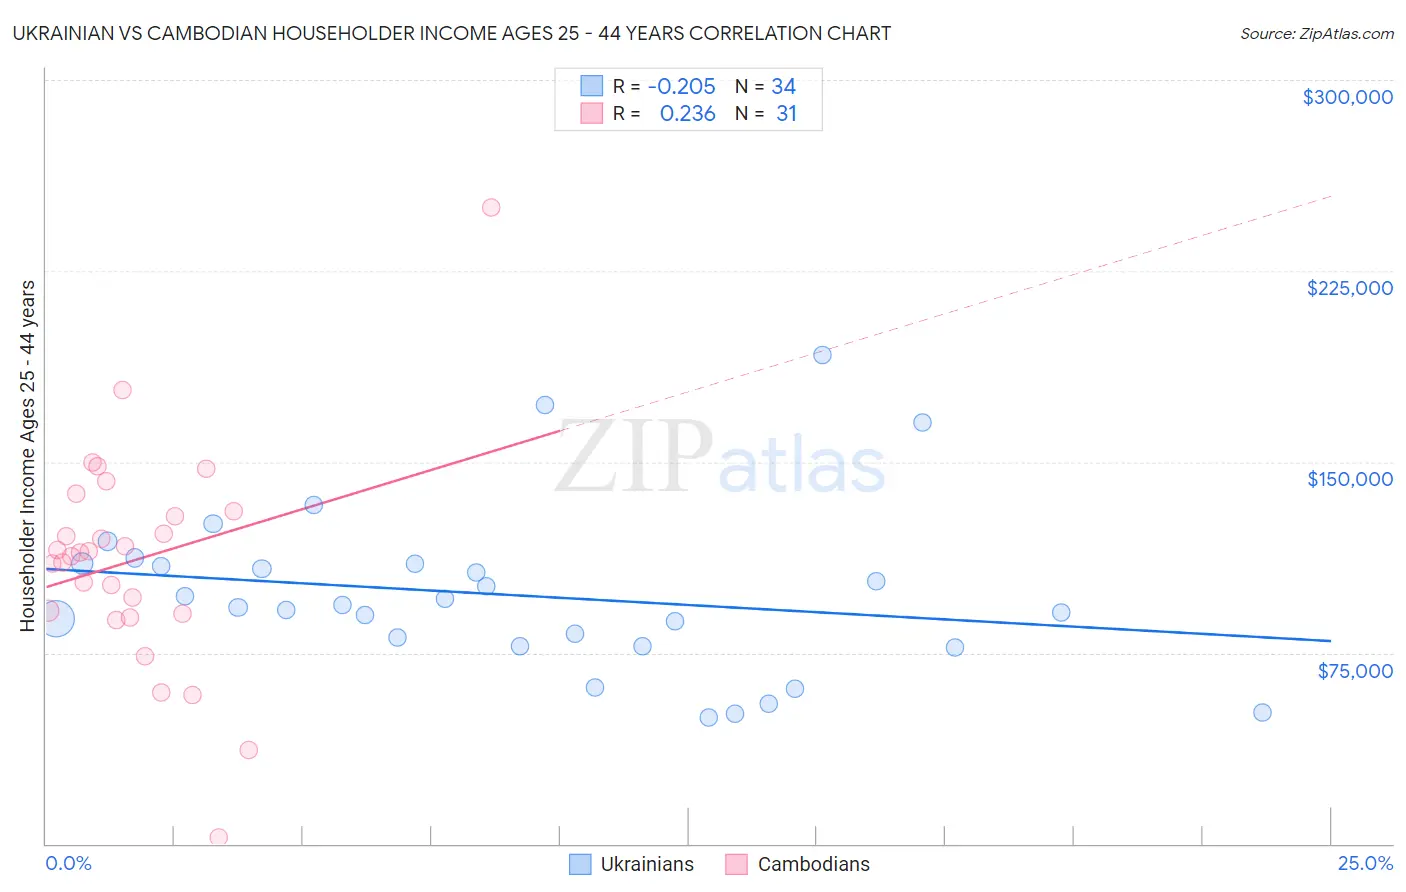 Ukrainian vs Cambodian Householder Income Ages 25 - 44 years